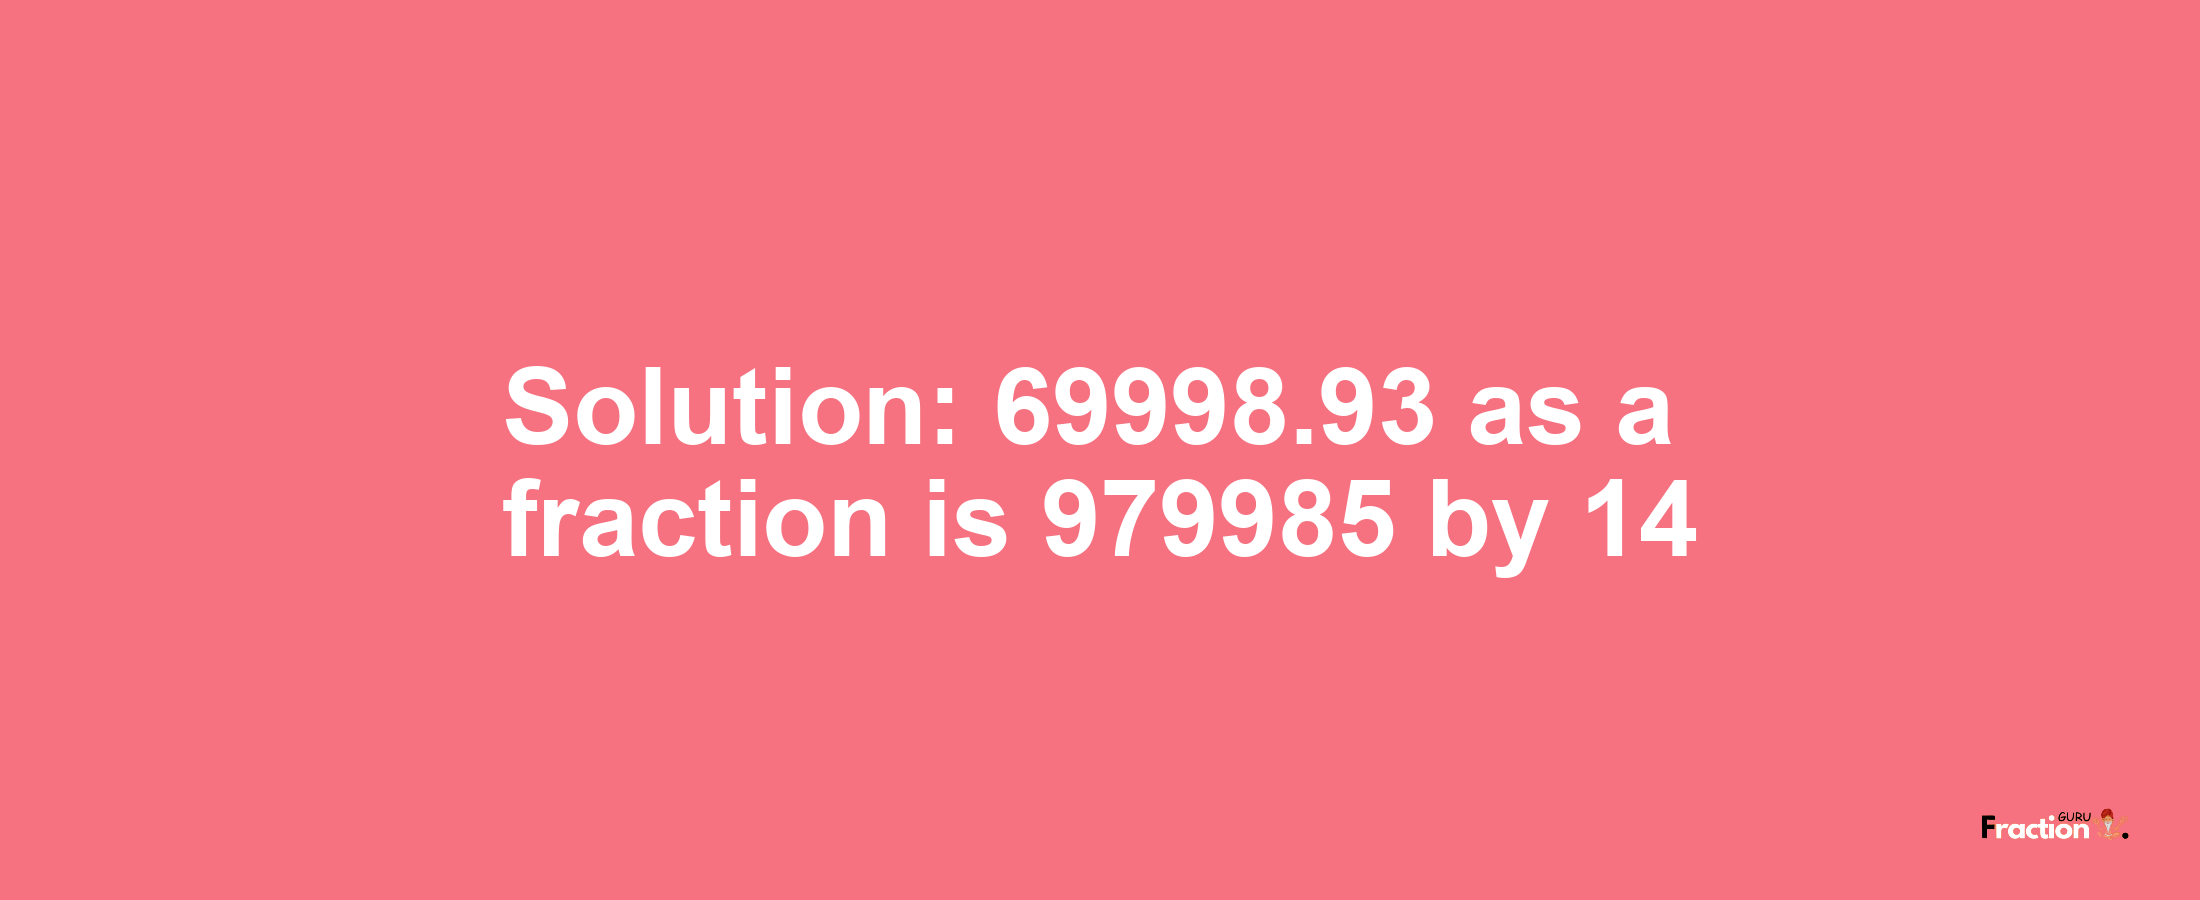 Solution:69998.93 as a fraction is 979985/14